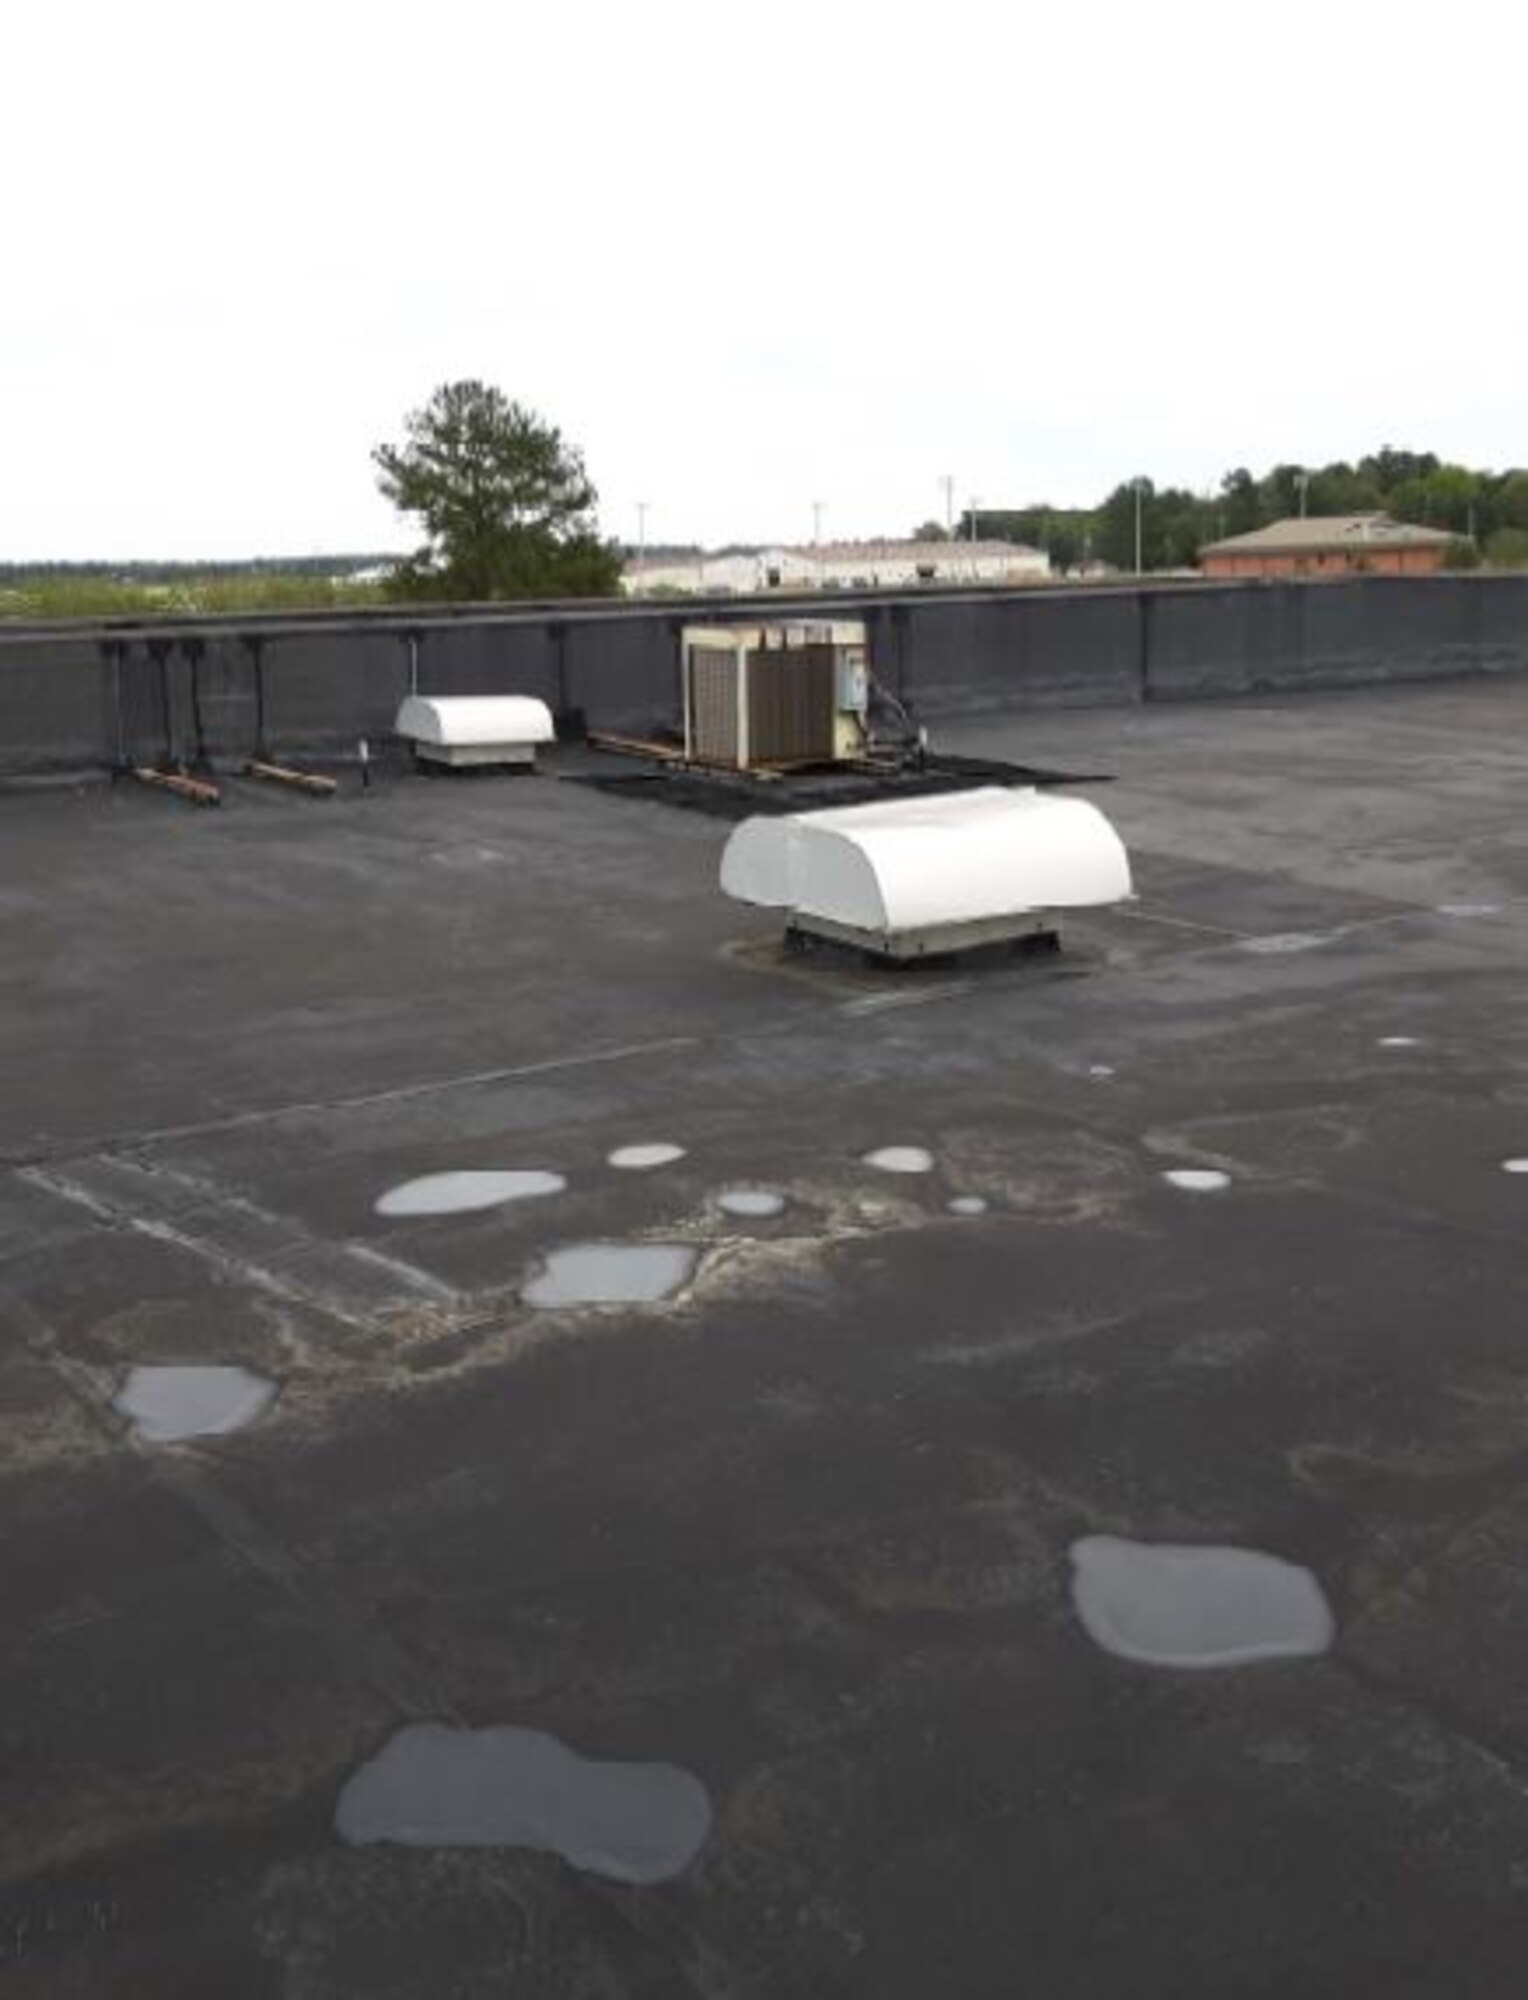 The prior roof was replaced because of water leaking through the roof into the Base Exchange. CYE Enterprises was awarded a contract to replace the roof. (Courtesy photo)